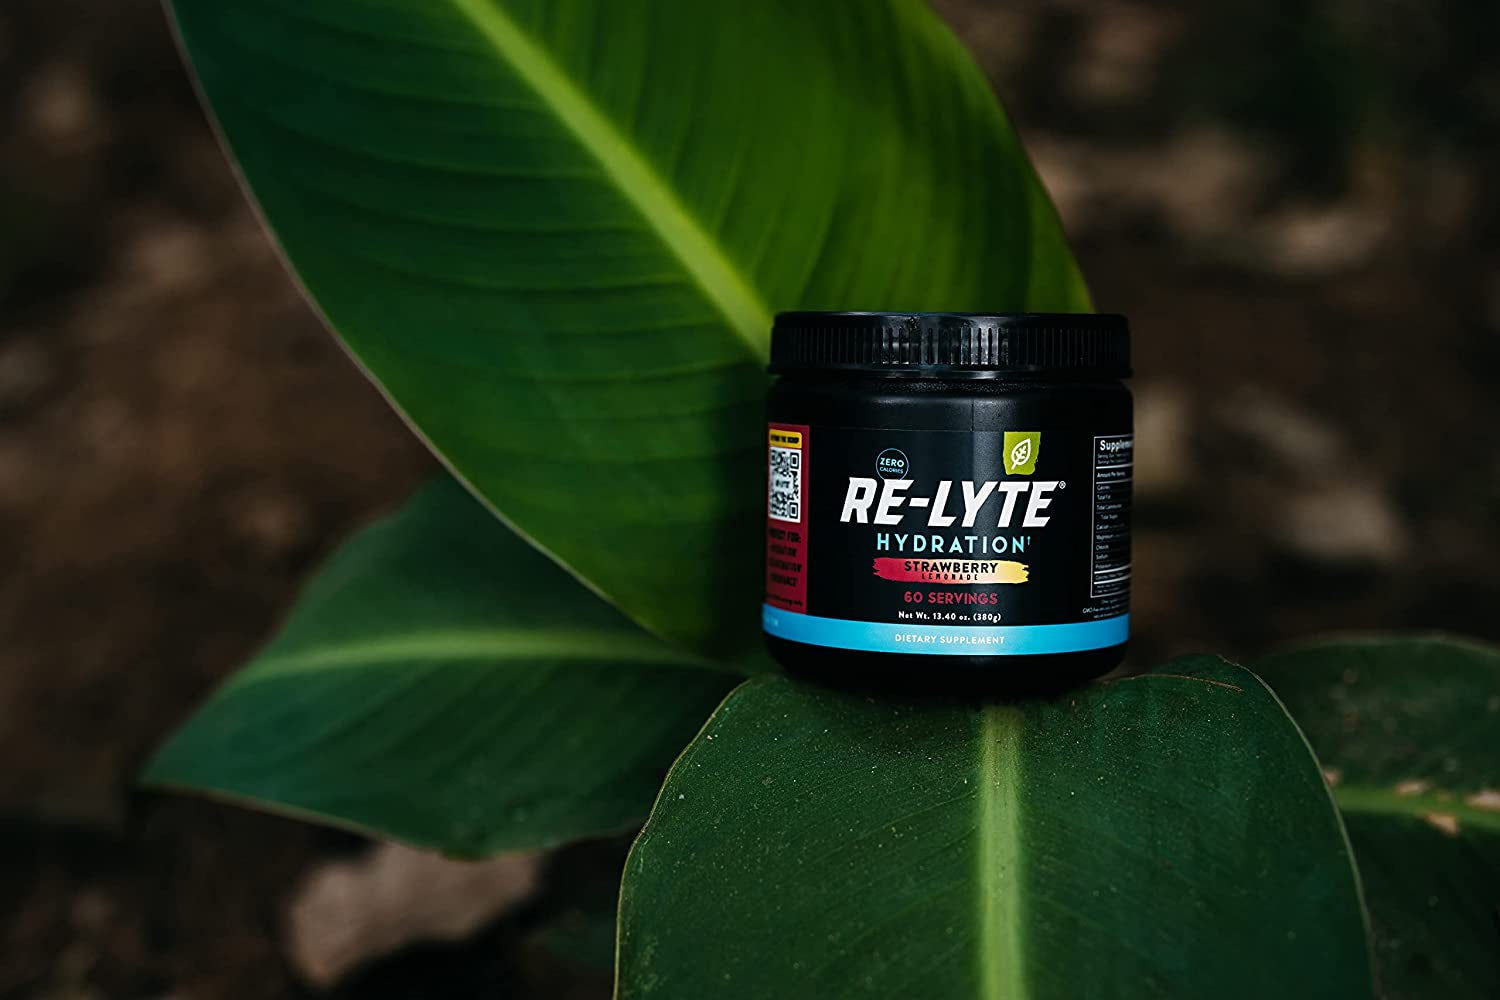 "Revitalize and Refresh with REDMOND Re-Lyte Hydration Electrolyte Mix - Irresistible Strawberry Lemonade Flavor!"